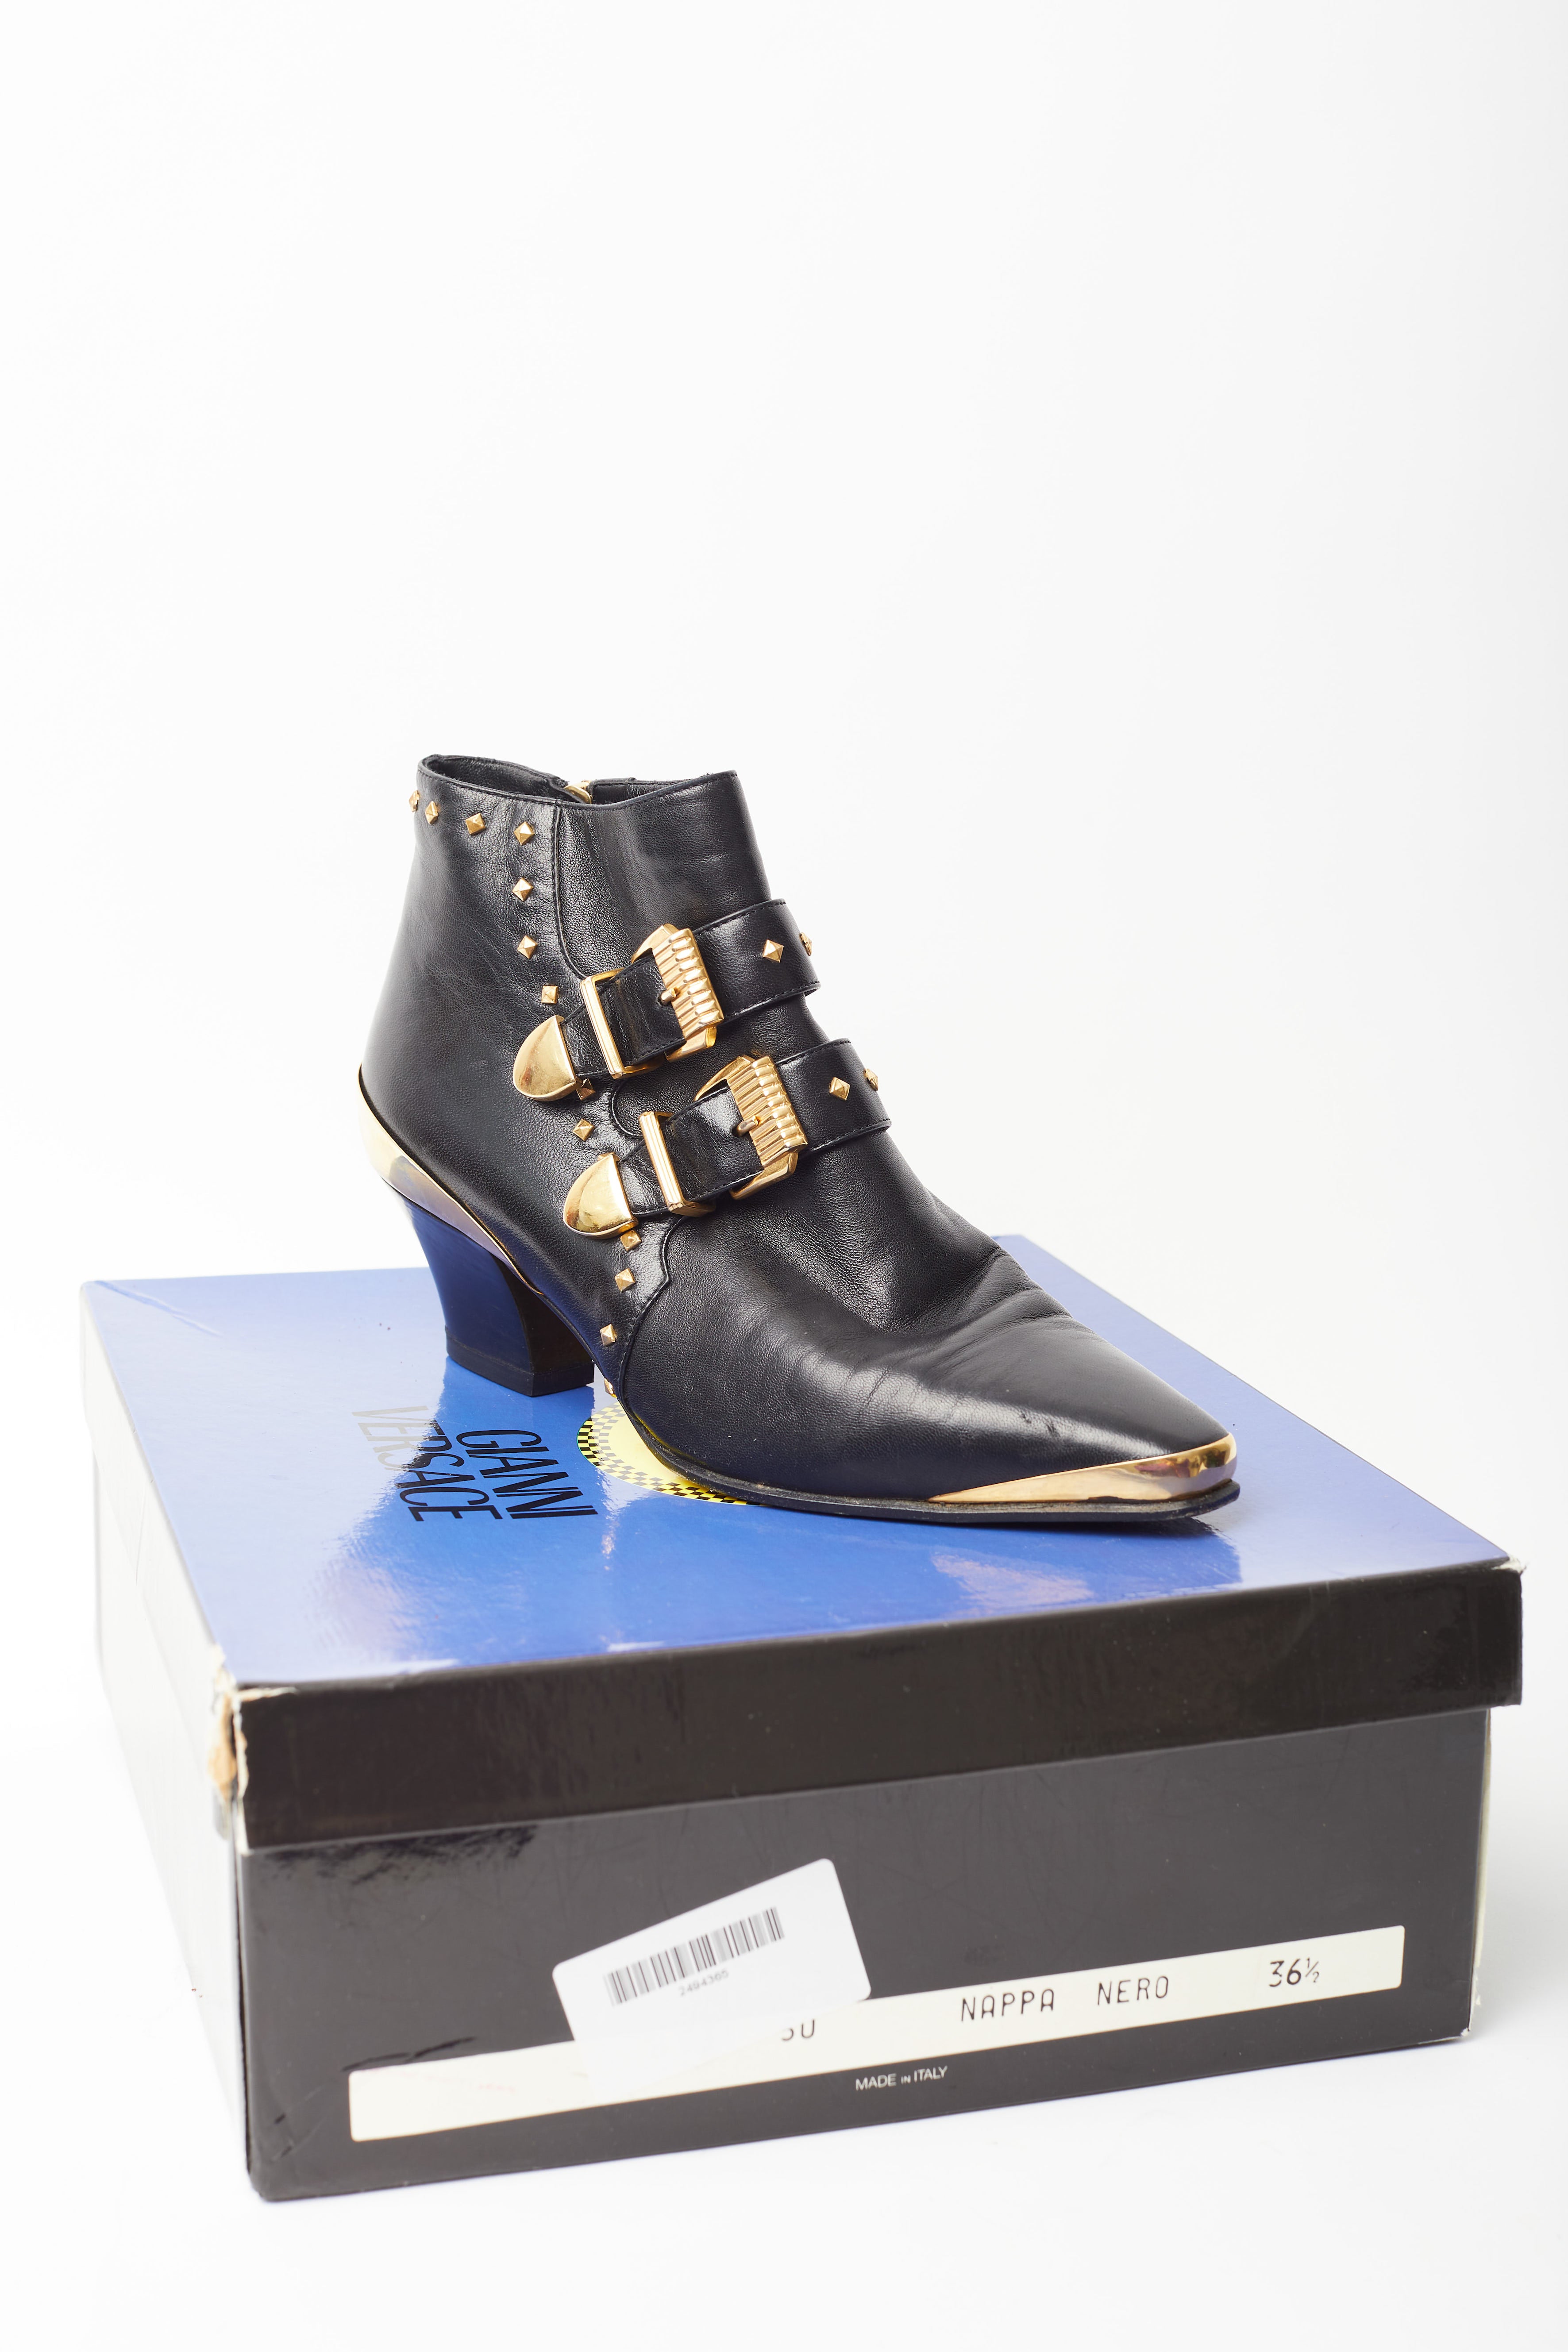 Gianni Versace <br> F/W 1992 'Miss S&M' runway studded leather ankle boots